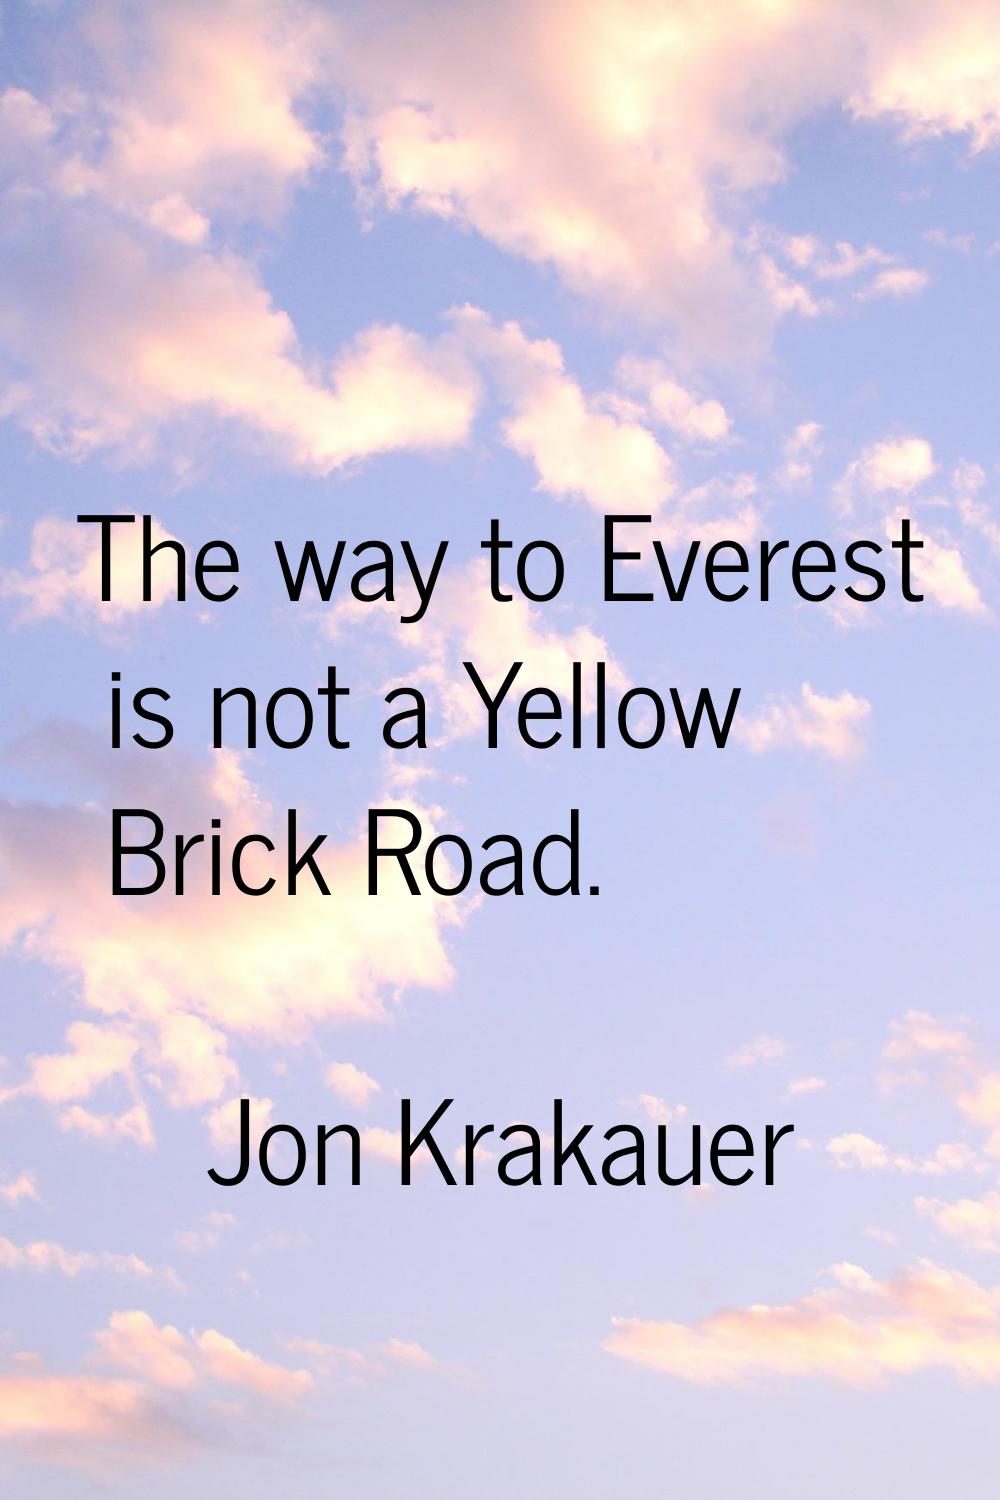 The way to Everest is not a Yellow Brick Road.